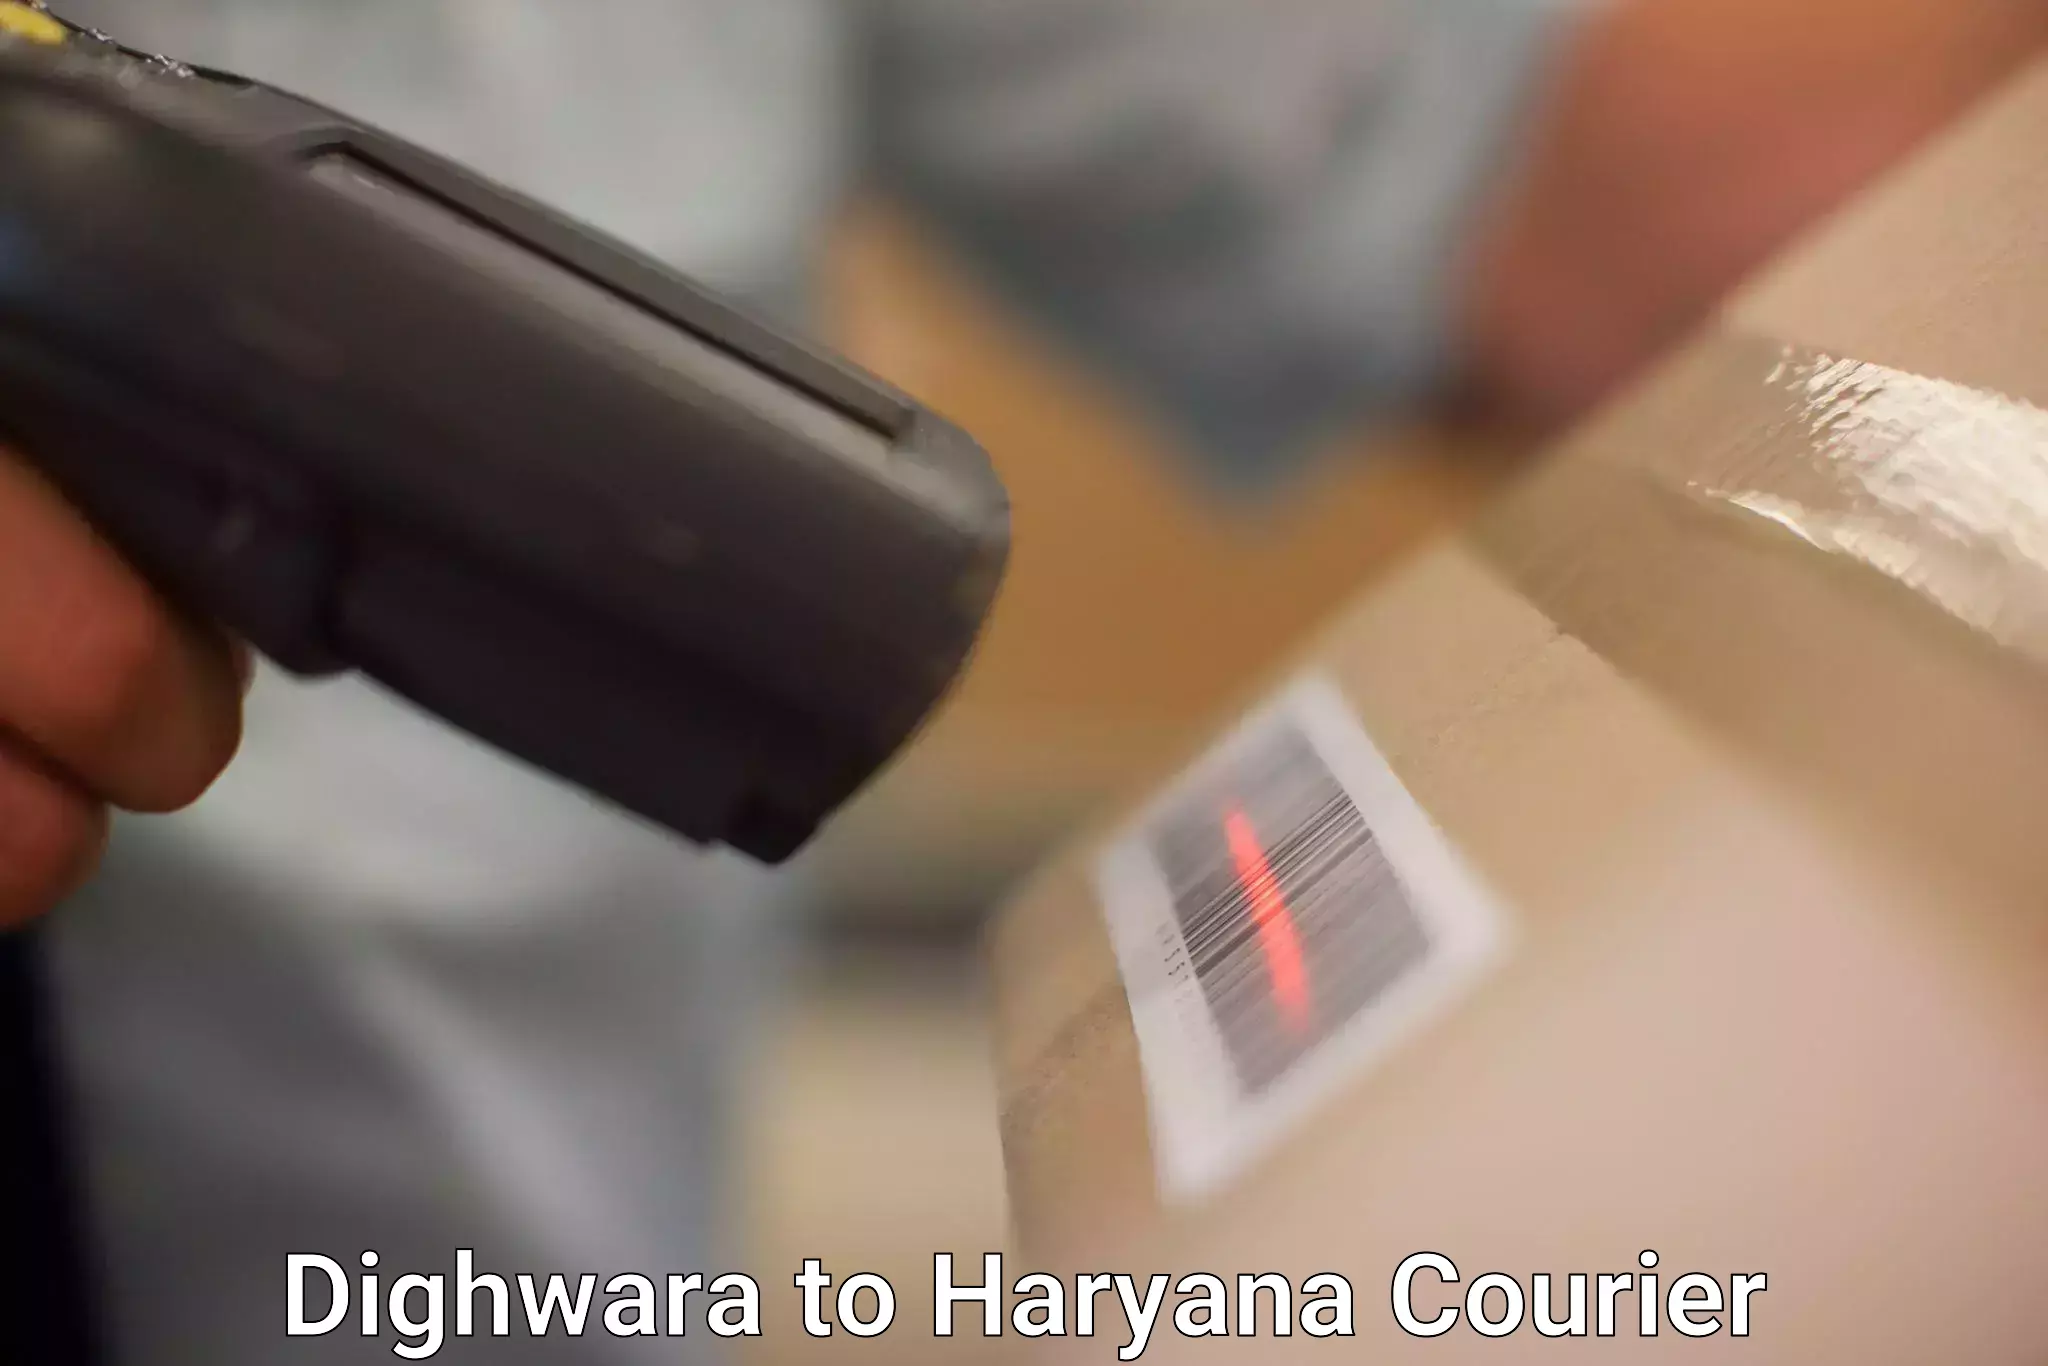 Professional courier services in Dighwara to Panchkula